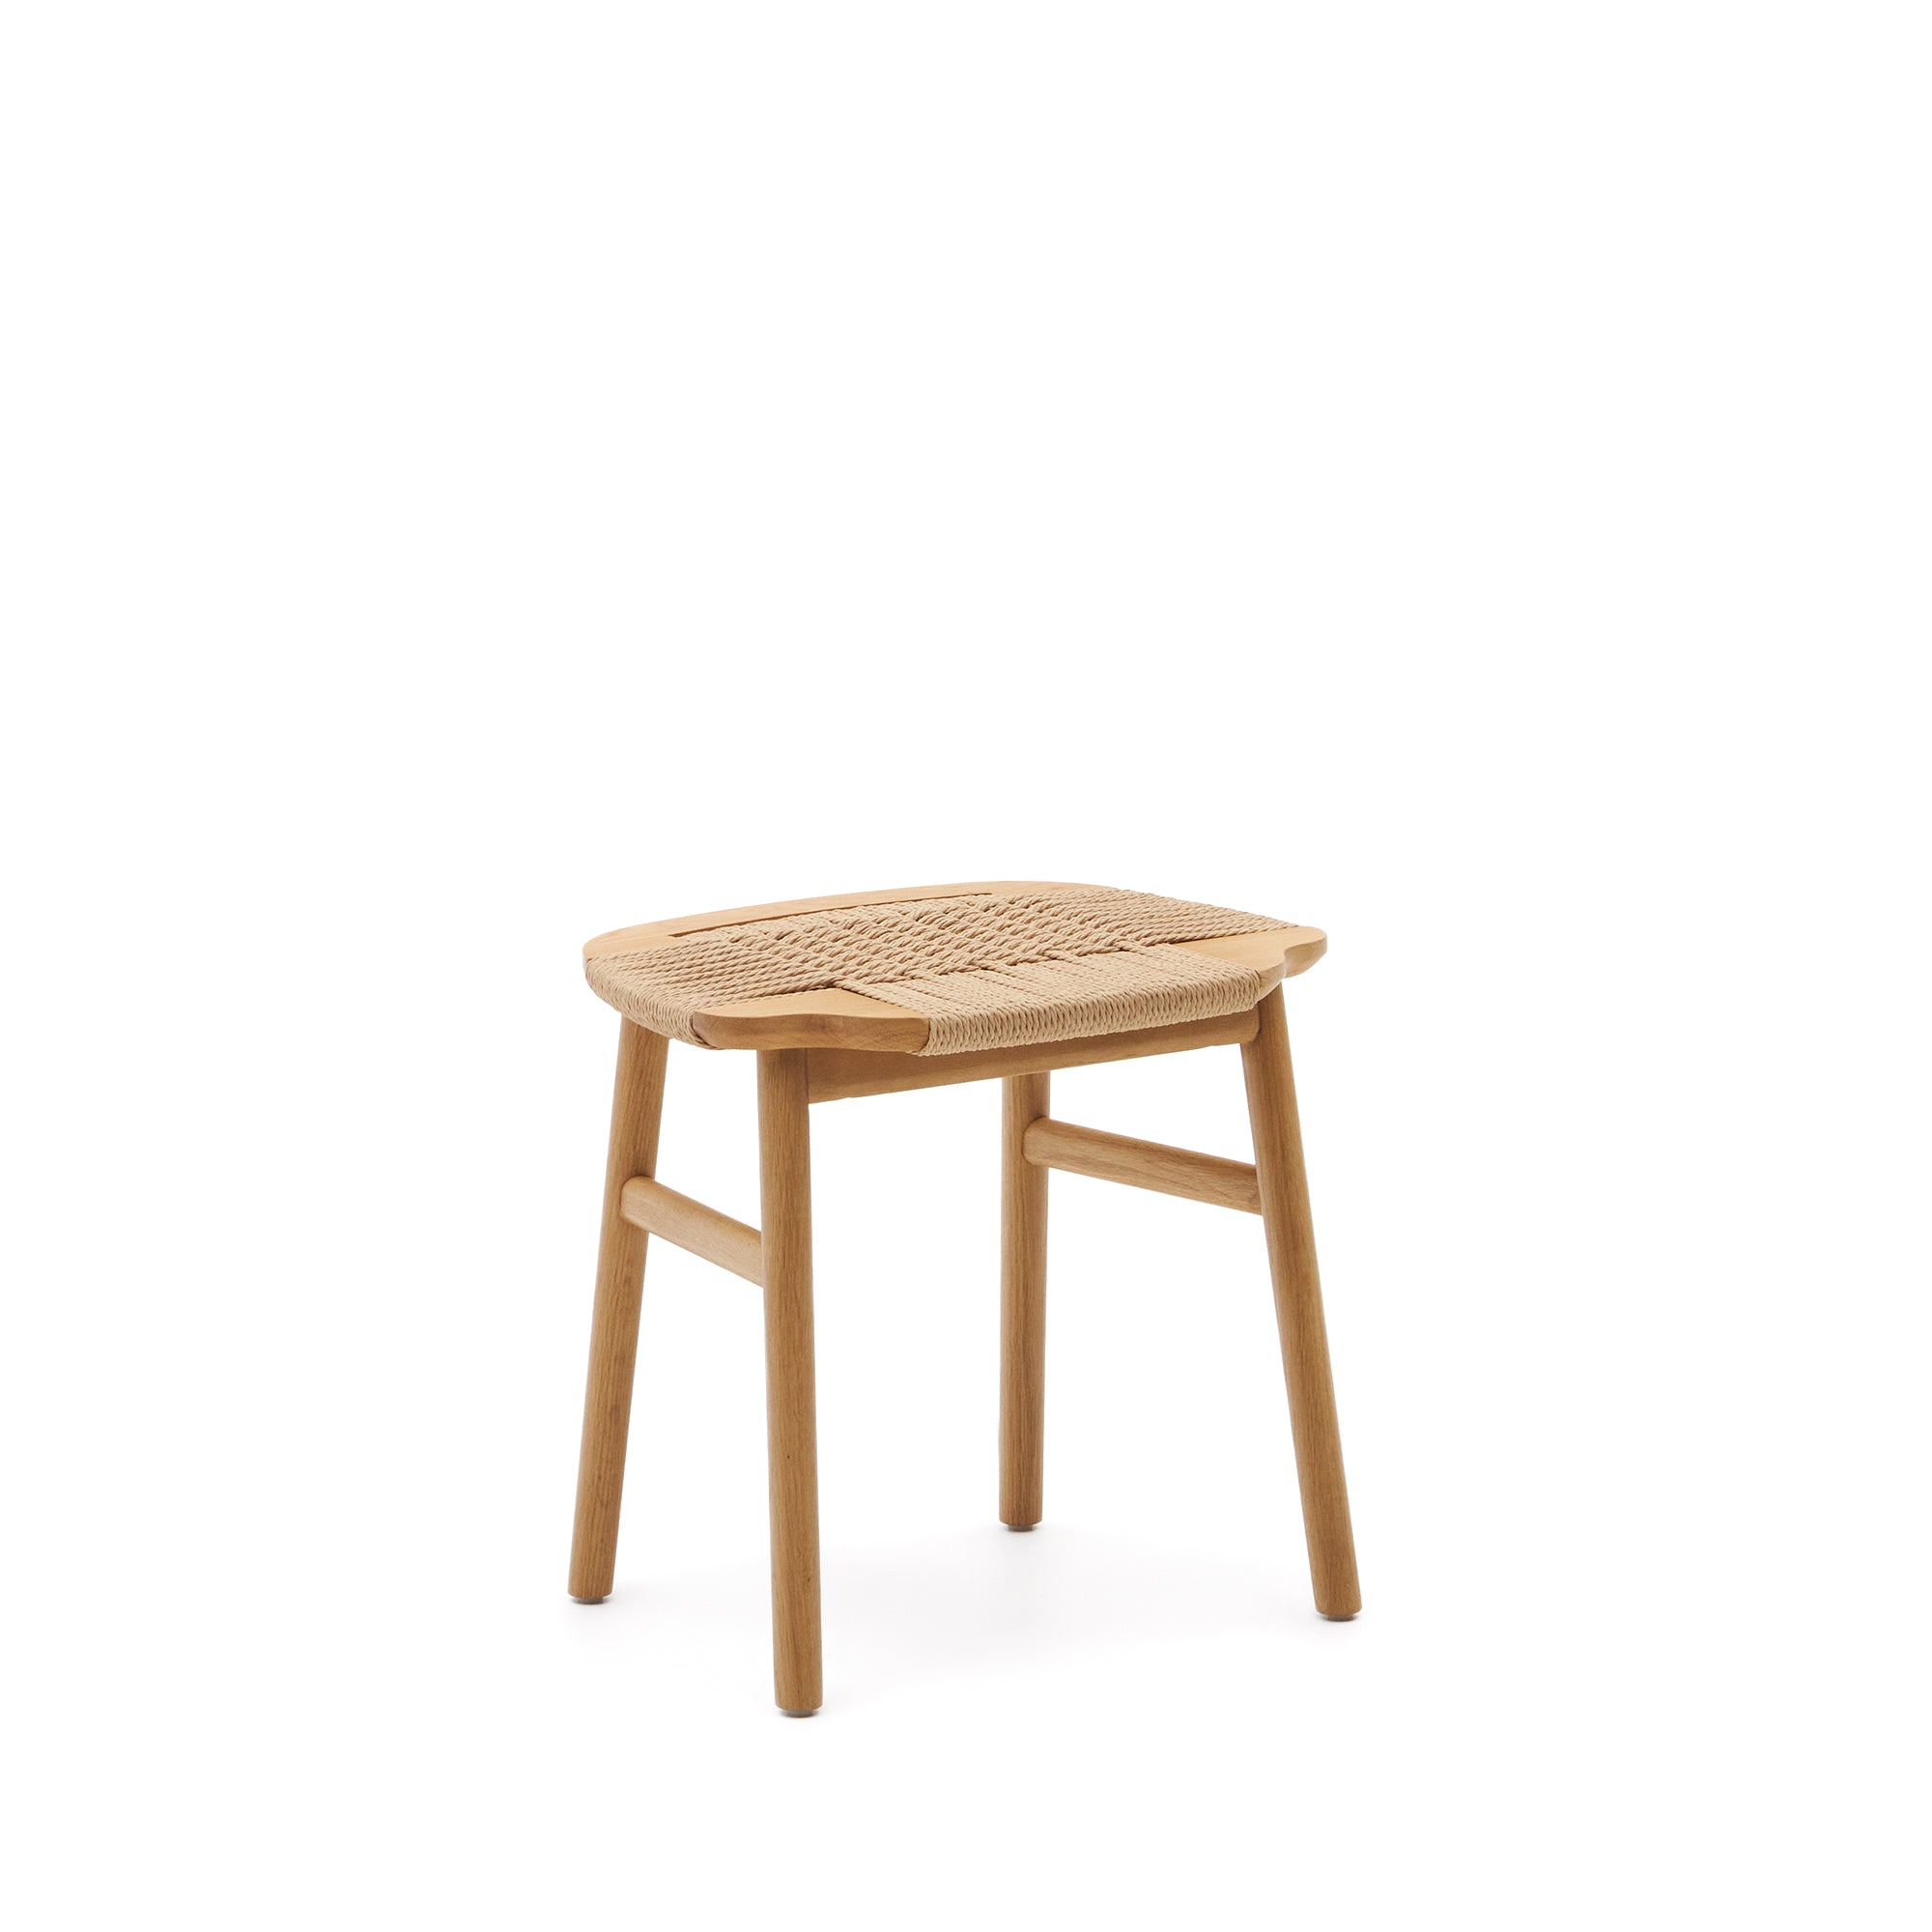 Enit stool made of beige paper cord and solid oak wood with natural finish, 43cm FSC Mix Credit